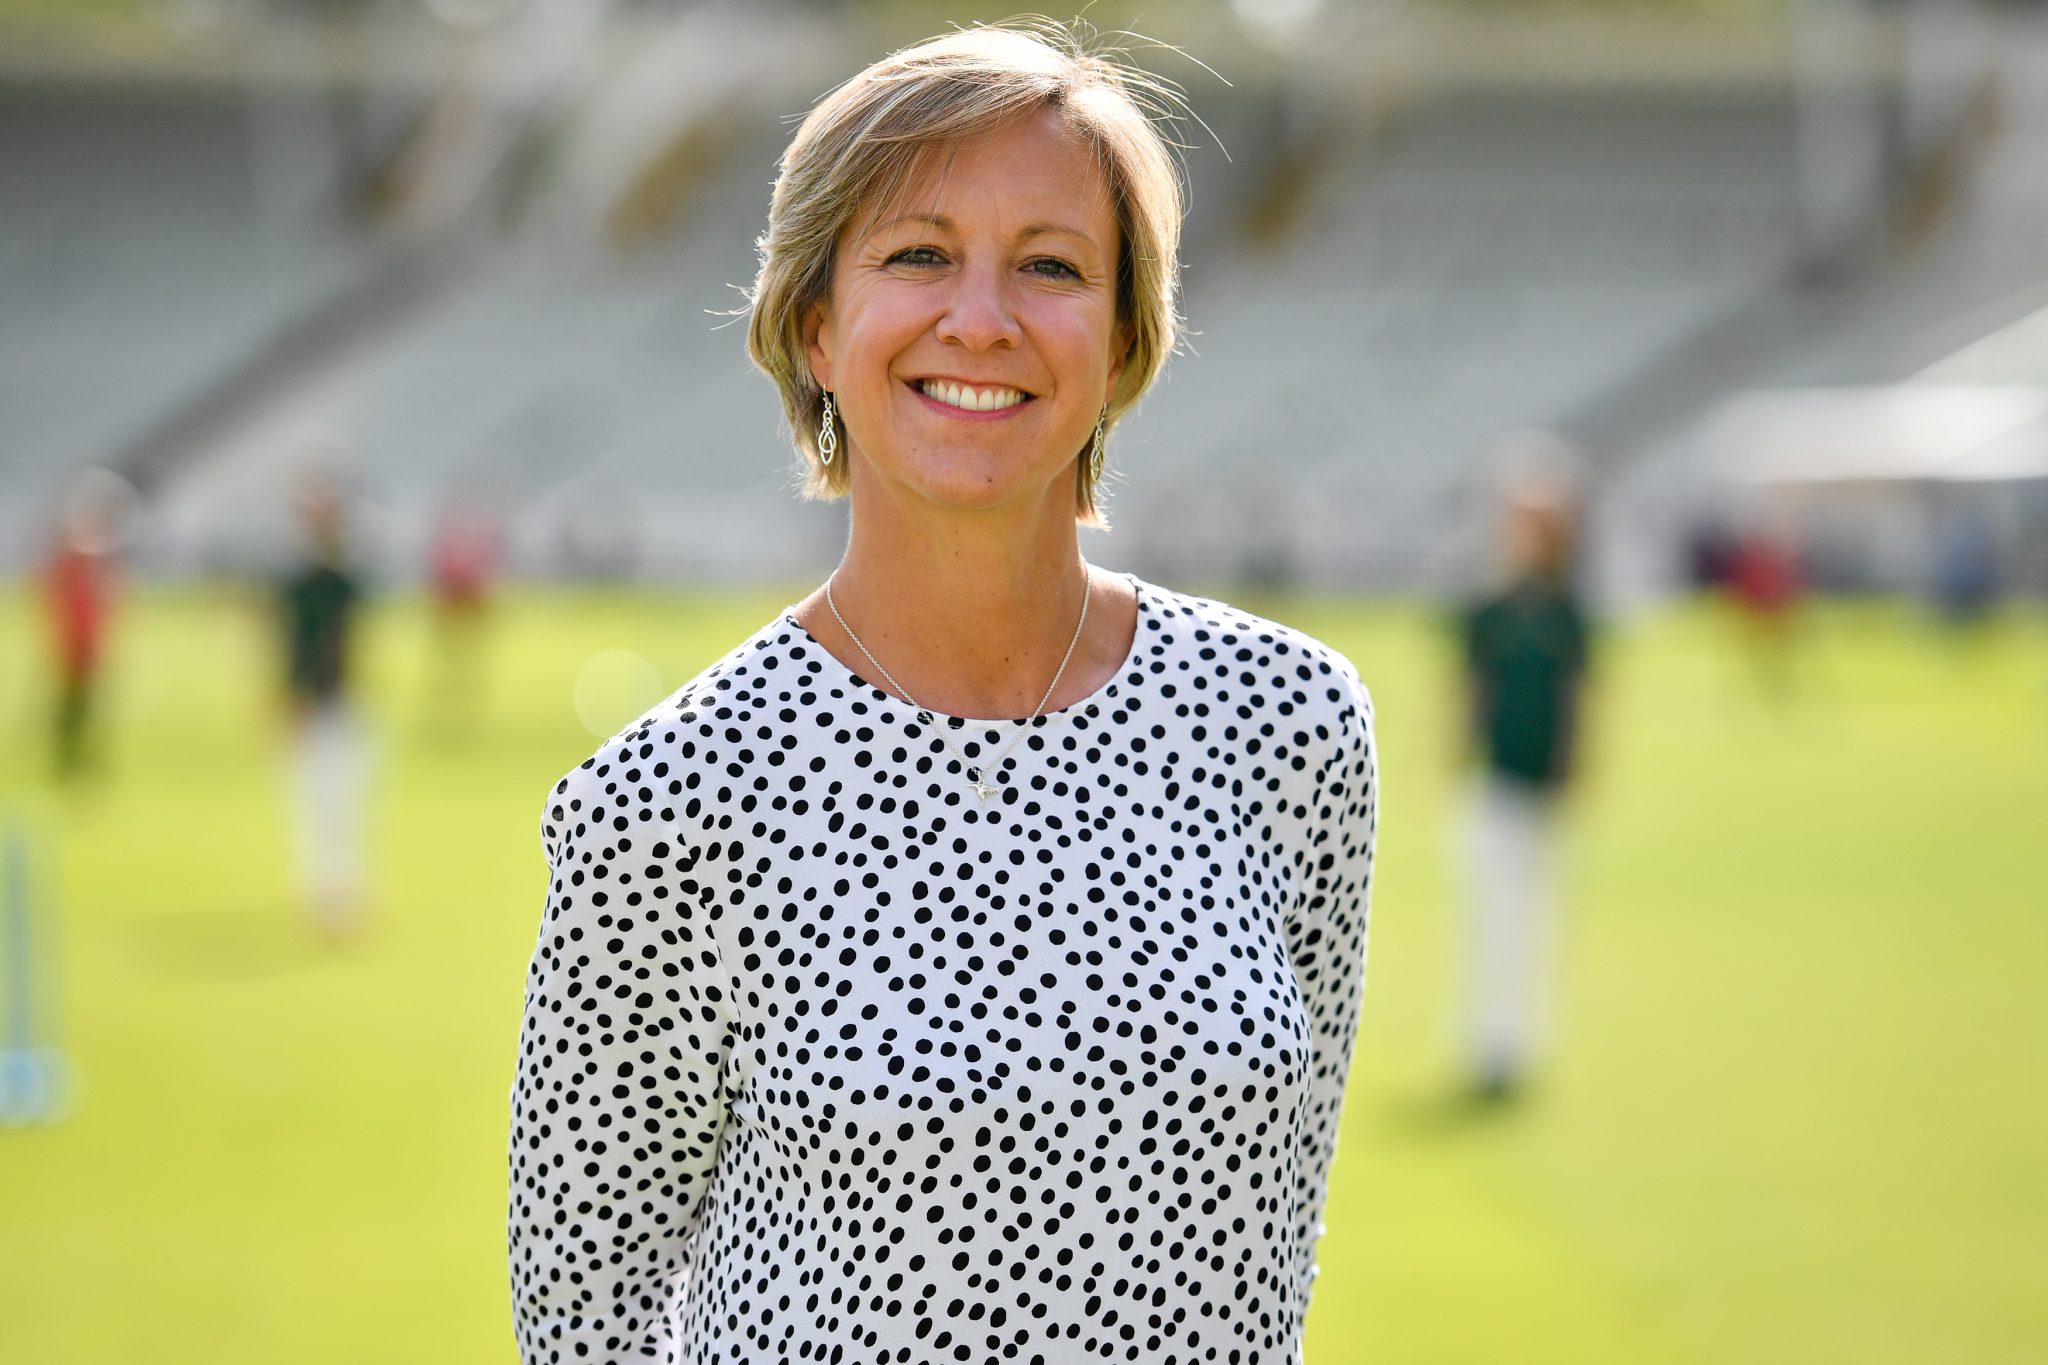 Clare Connor recalls ‘fairytale’ creation of Women’s Ashes trophy 25 years ago